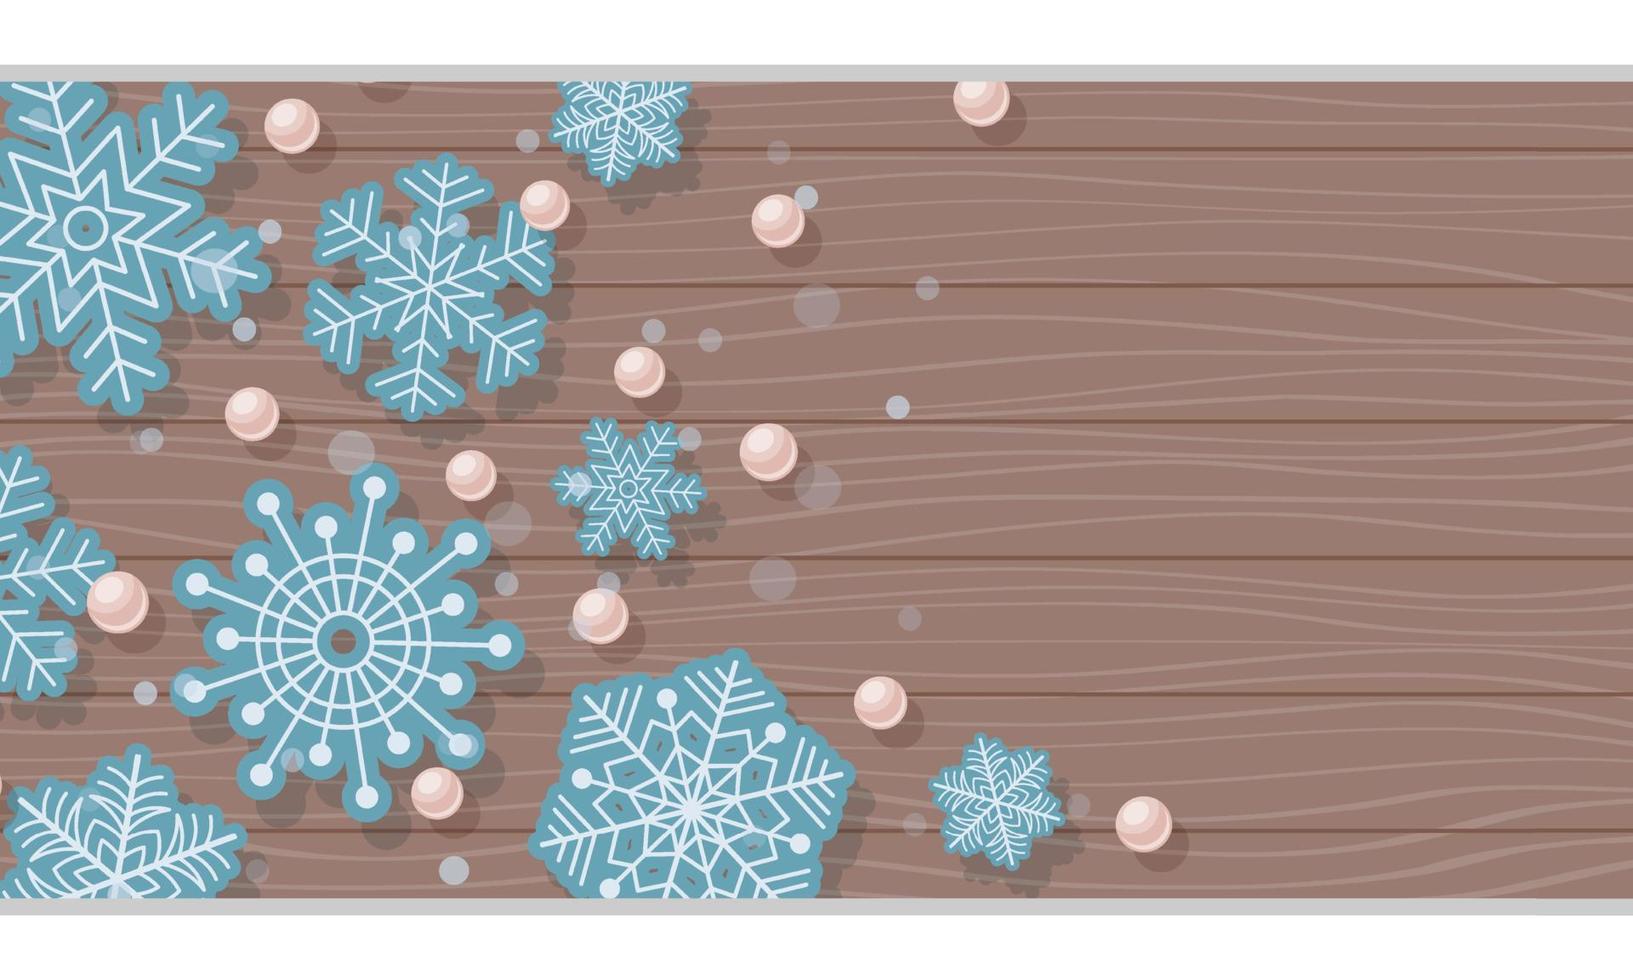 Winter card with snowflakes on wood background. Vector illustration. Horizontal flyer, banner. Design for social media, top of website.